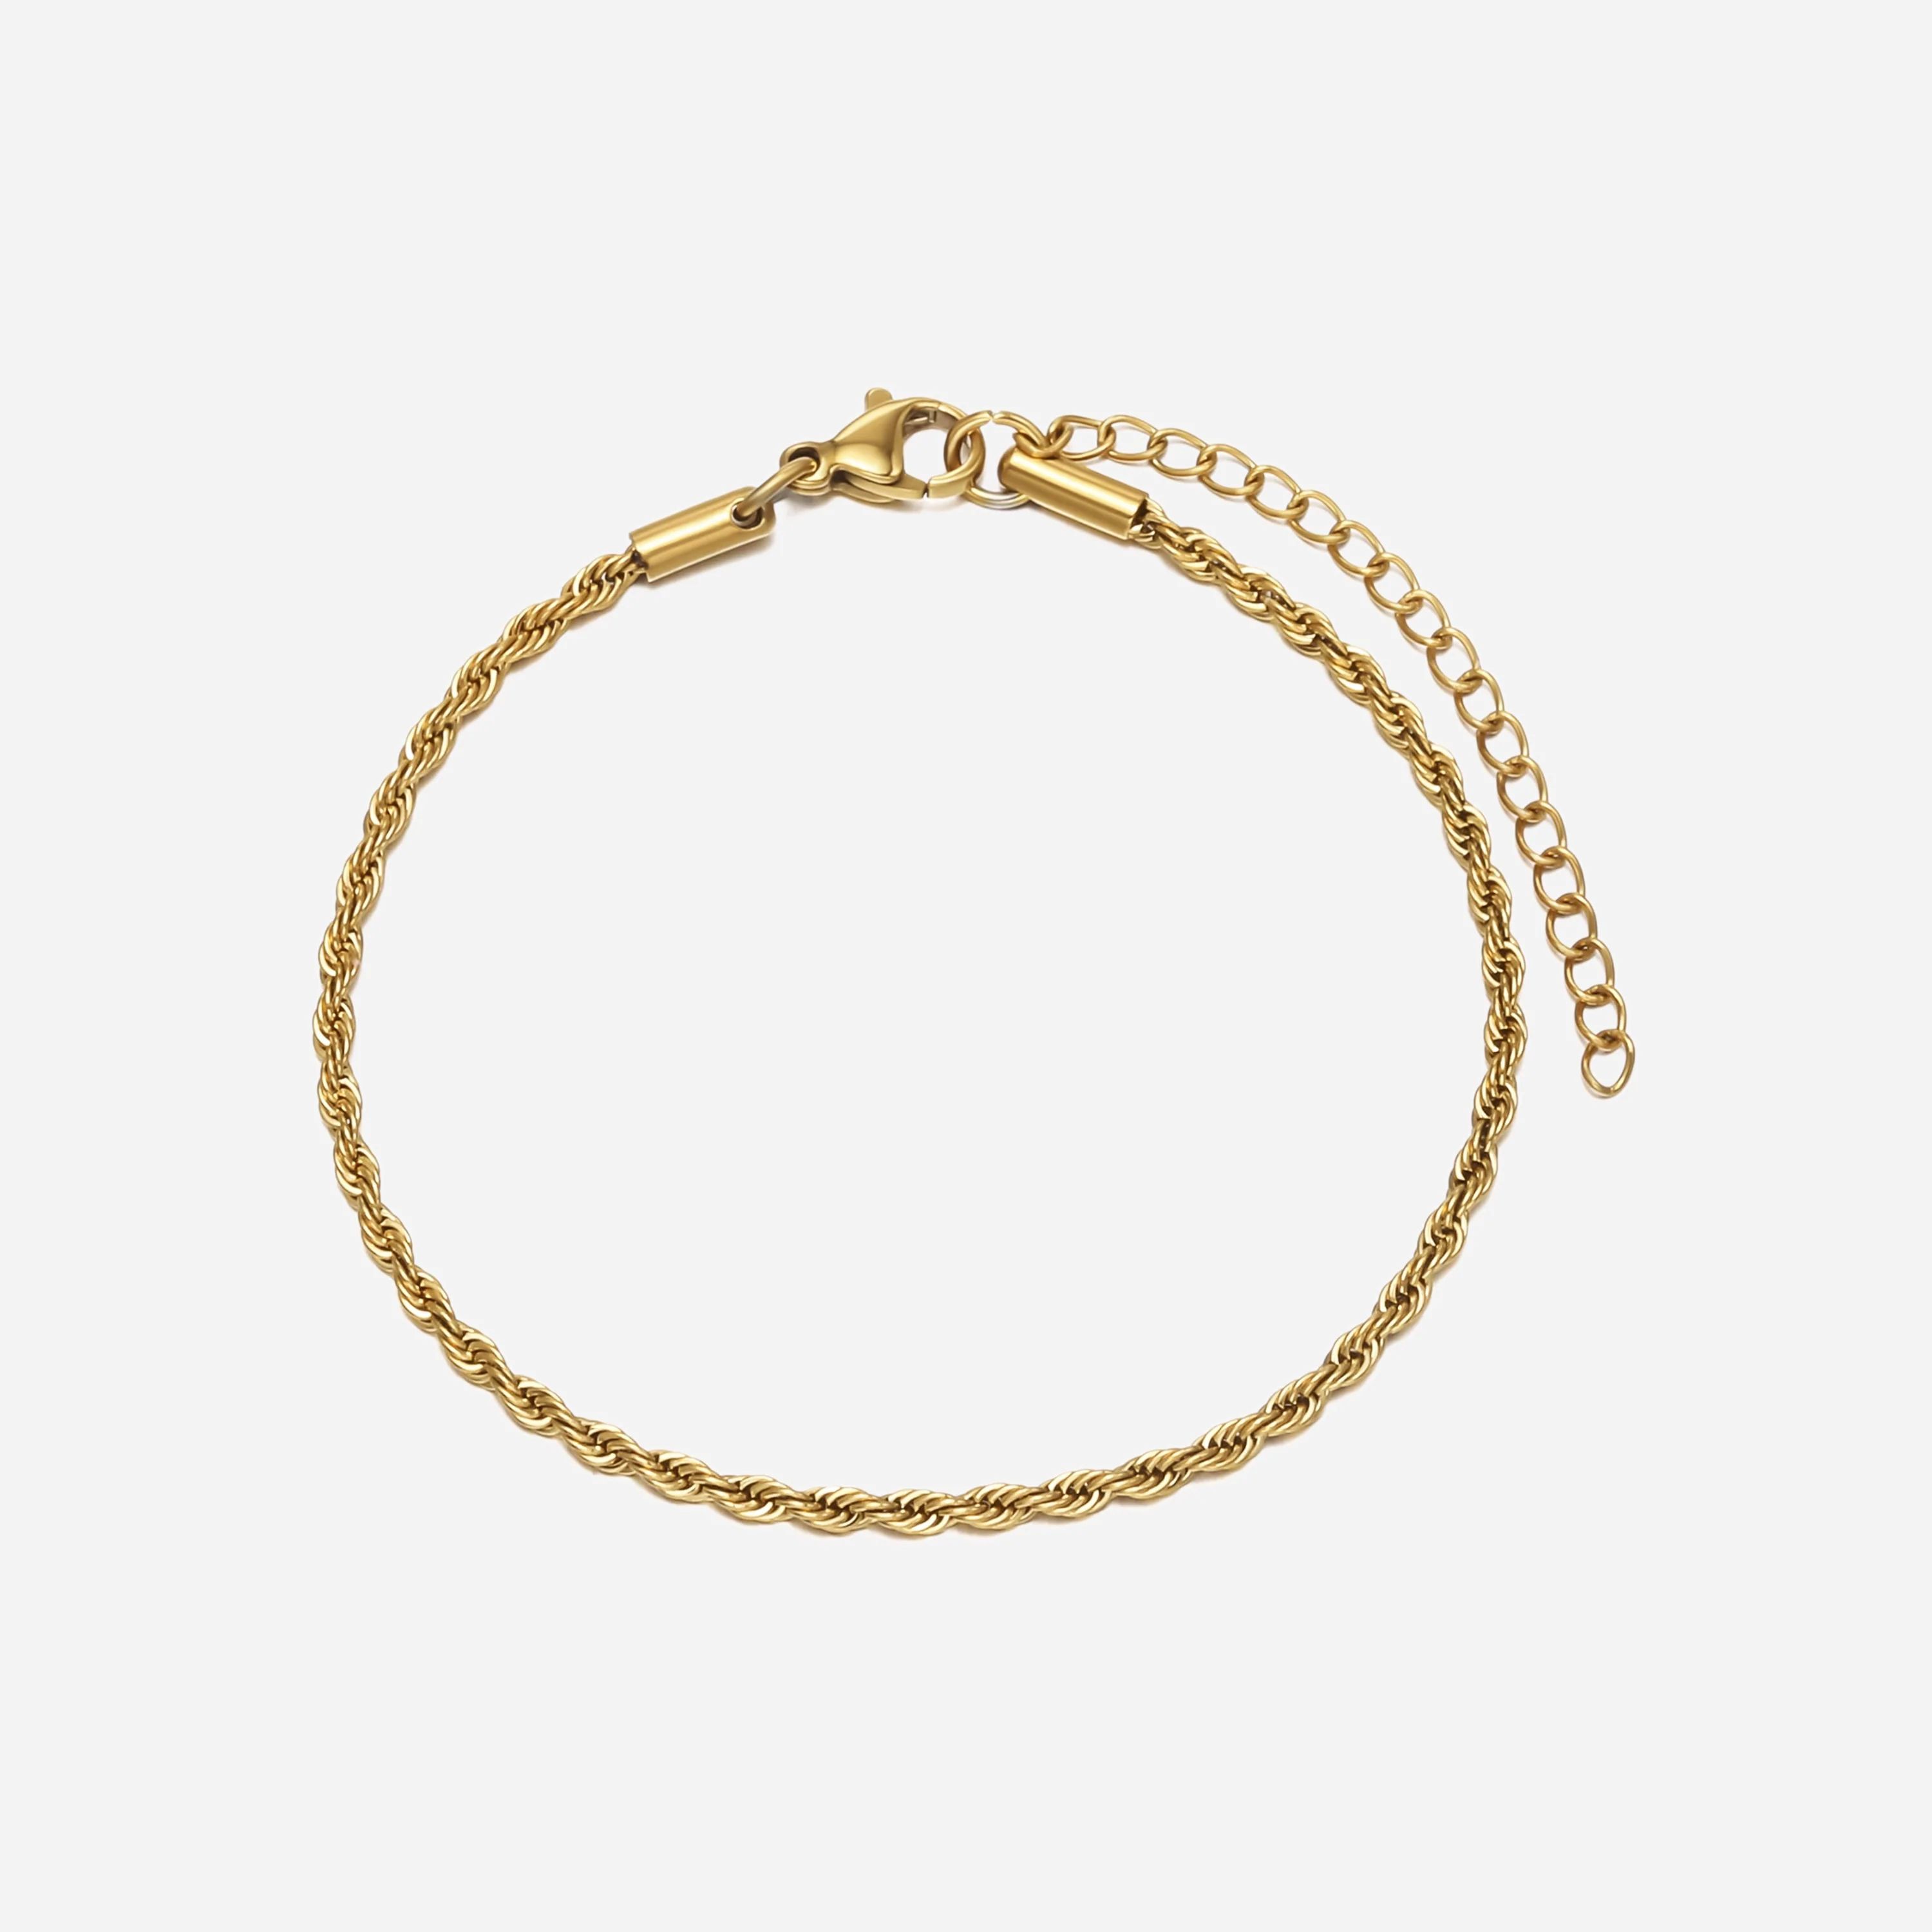 Abby Singapore Rope Chain Bracelet | Victoria Emerson